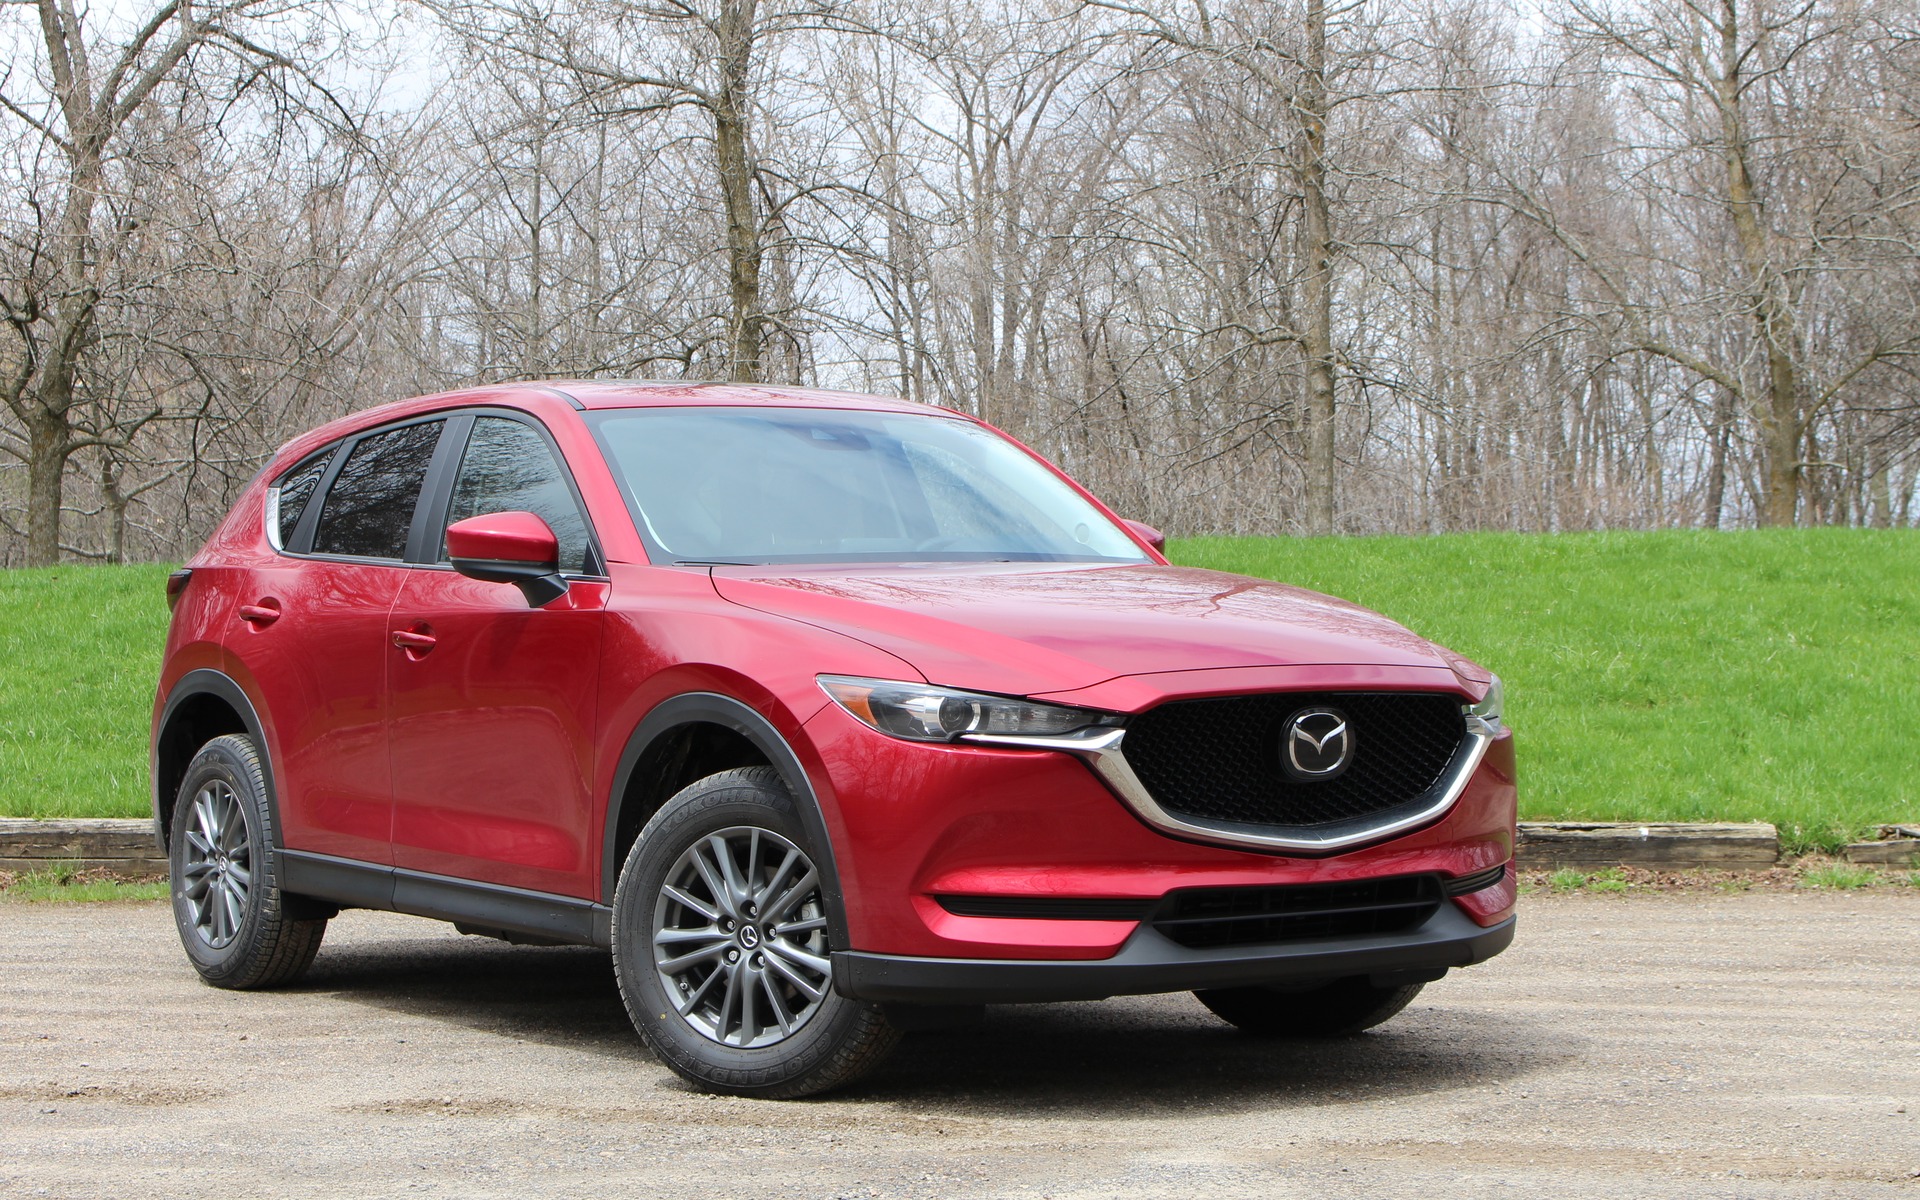 2017 Mazda CX-5: Beauty that's More than Skin Deep - The Car Guide